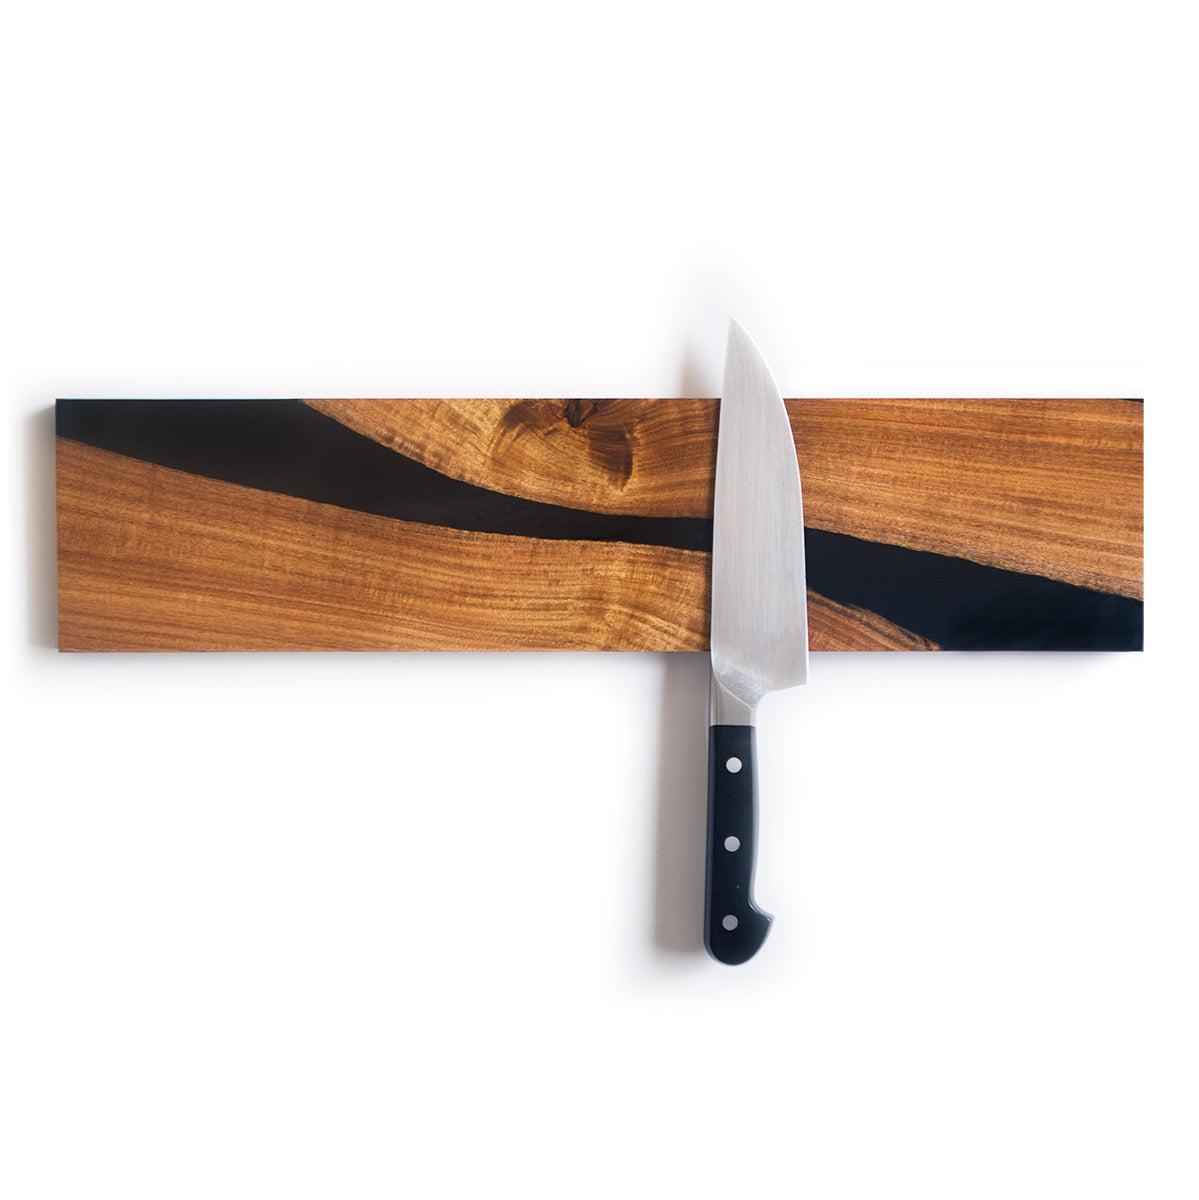 magnetic knife holder bar handcrafted from live edge salvaged acacia wood and black epoxy resin